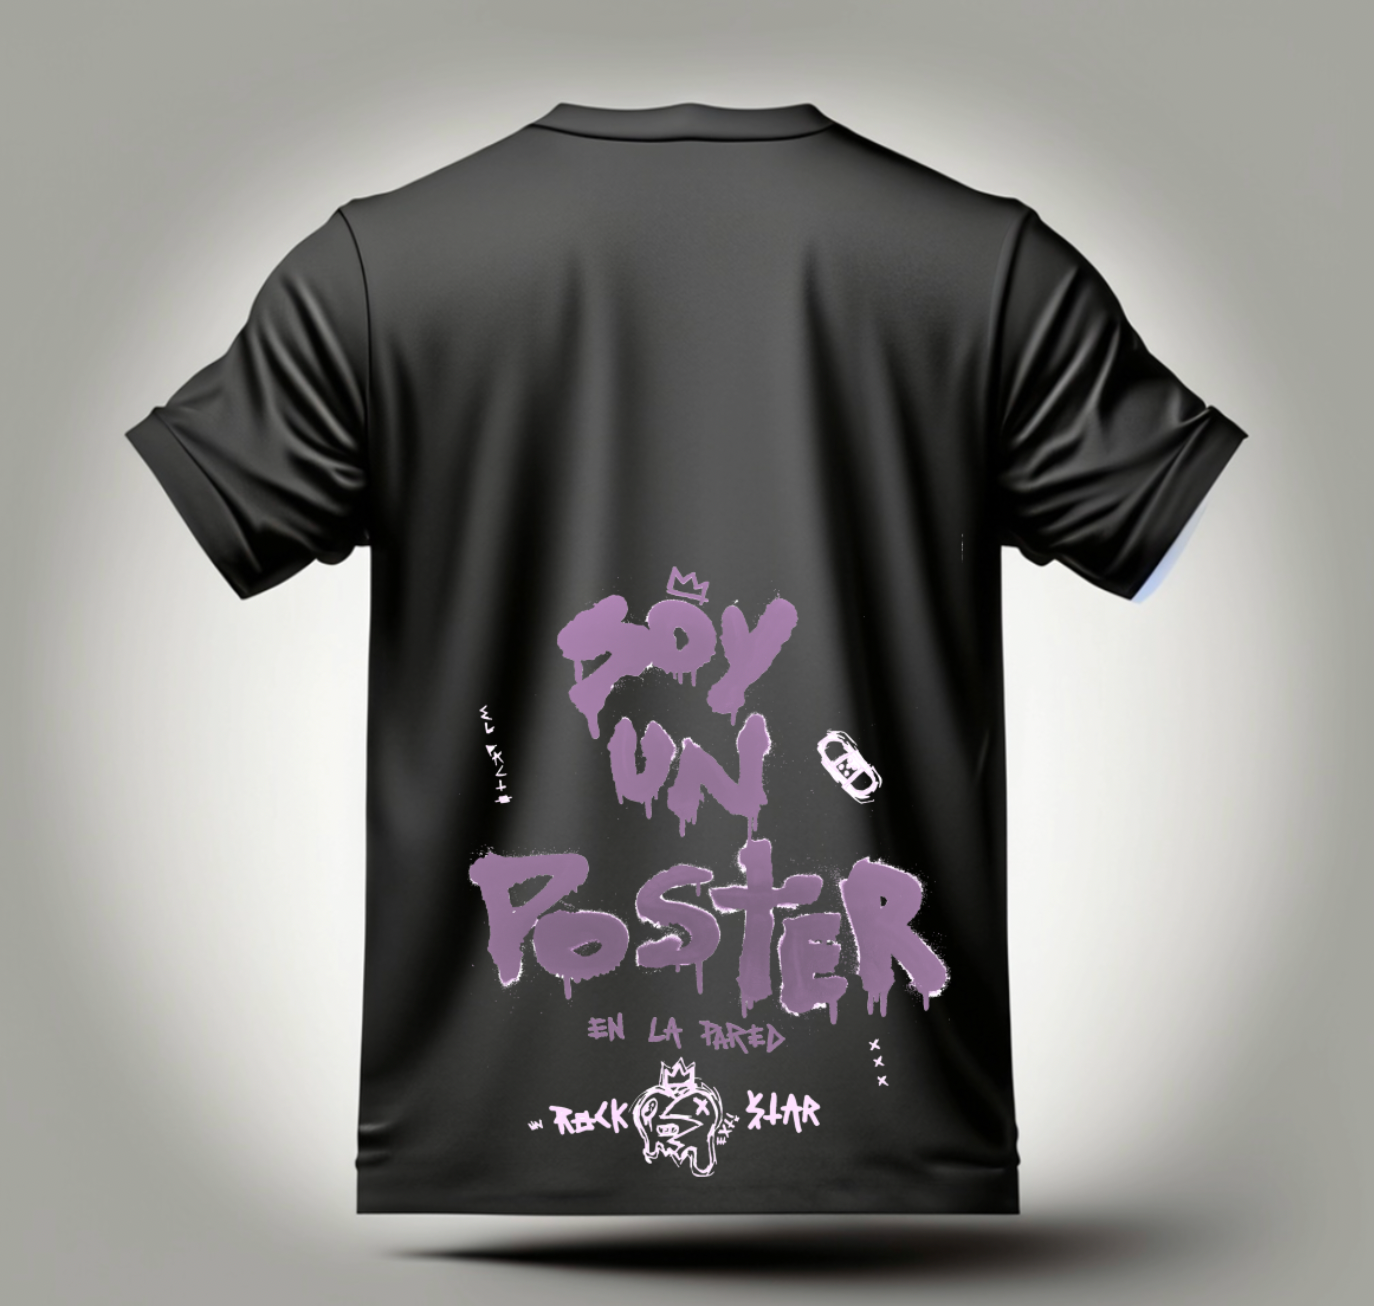 EXTI By Grooveman Music Soy un Poster T-Shirts | Grooveman Music